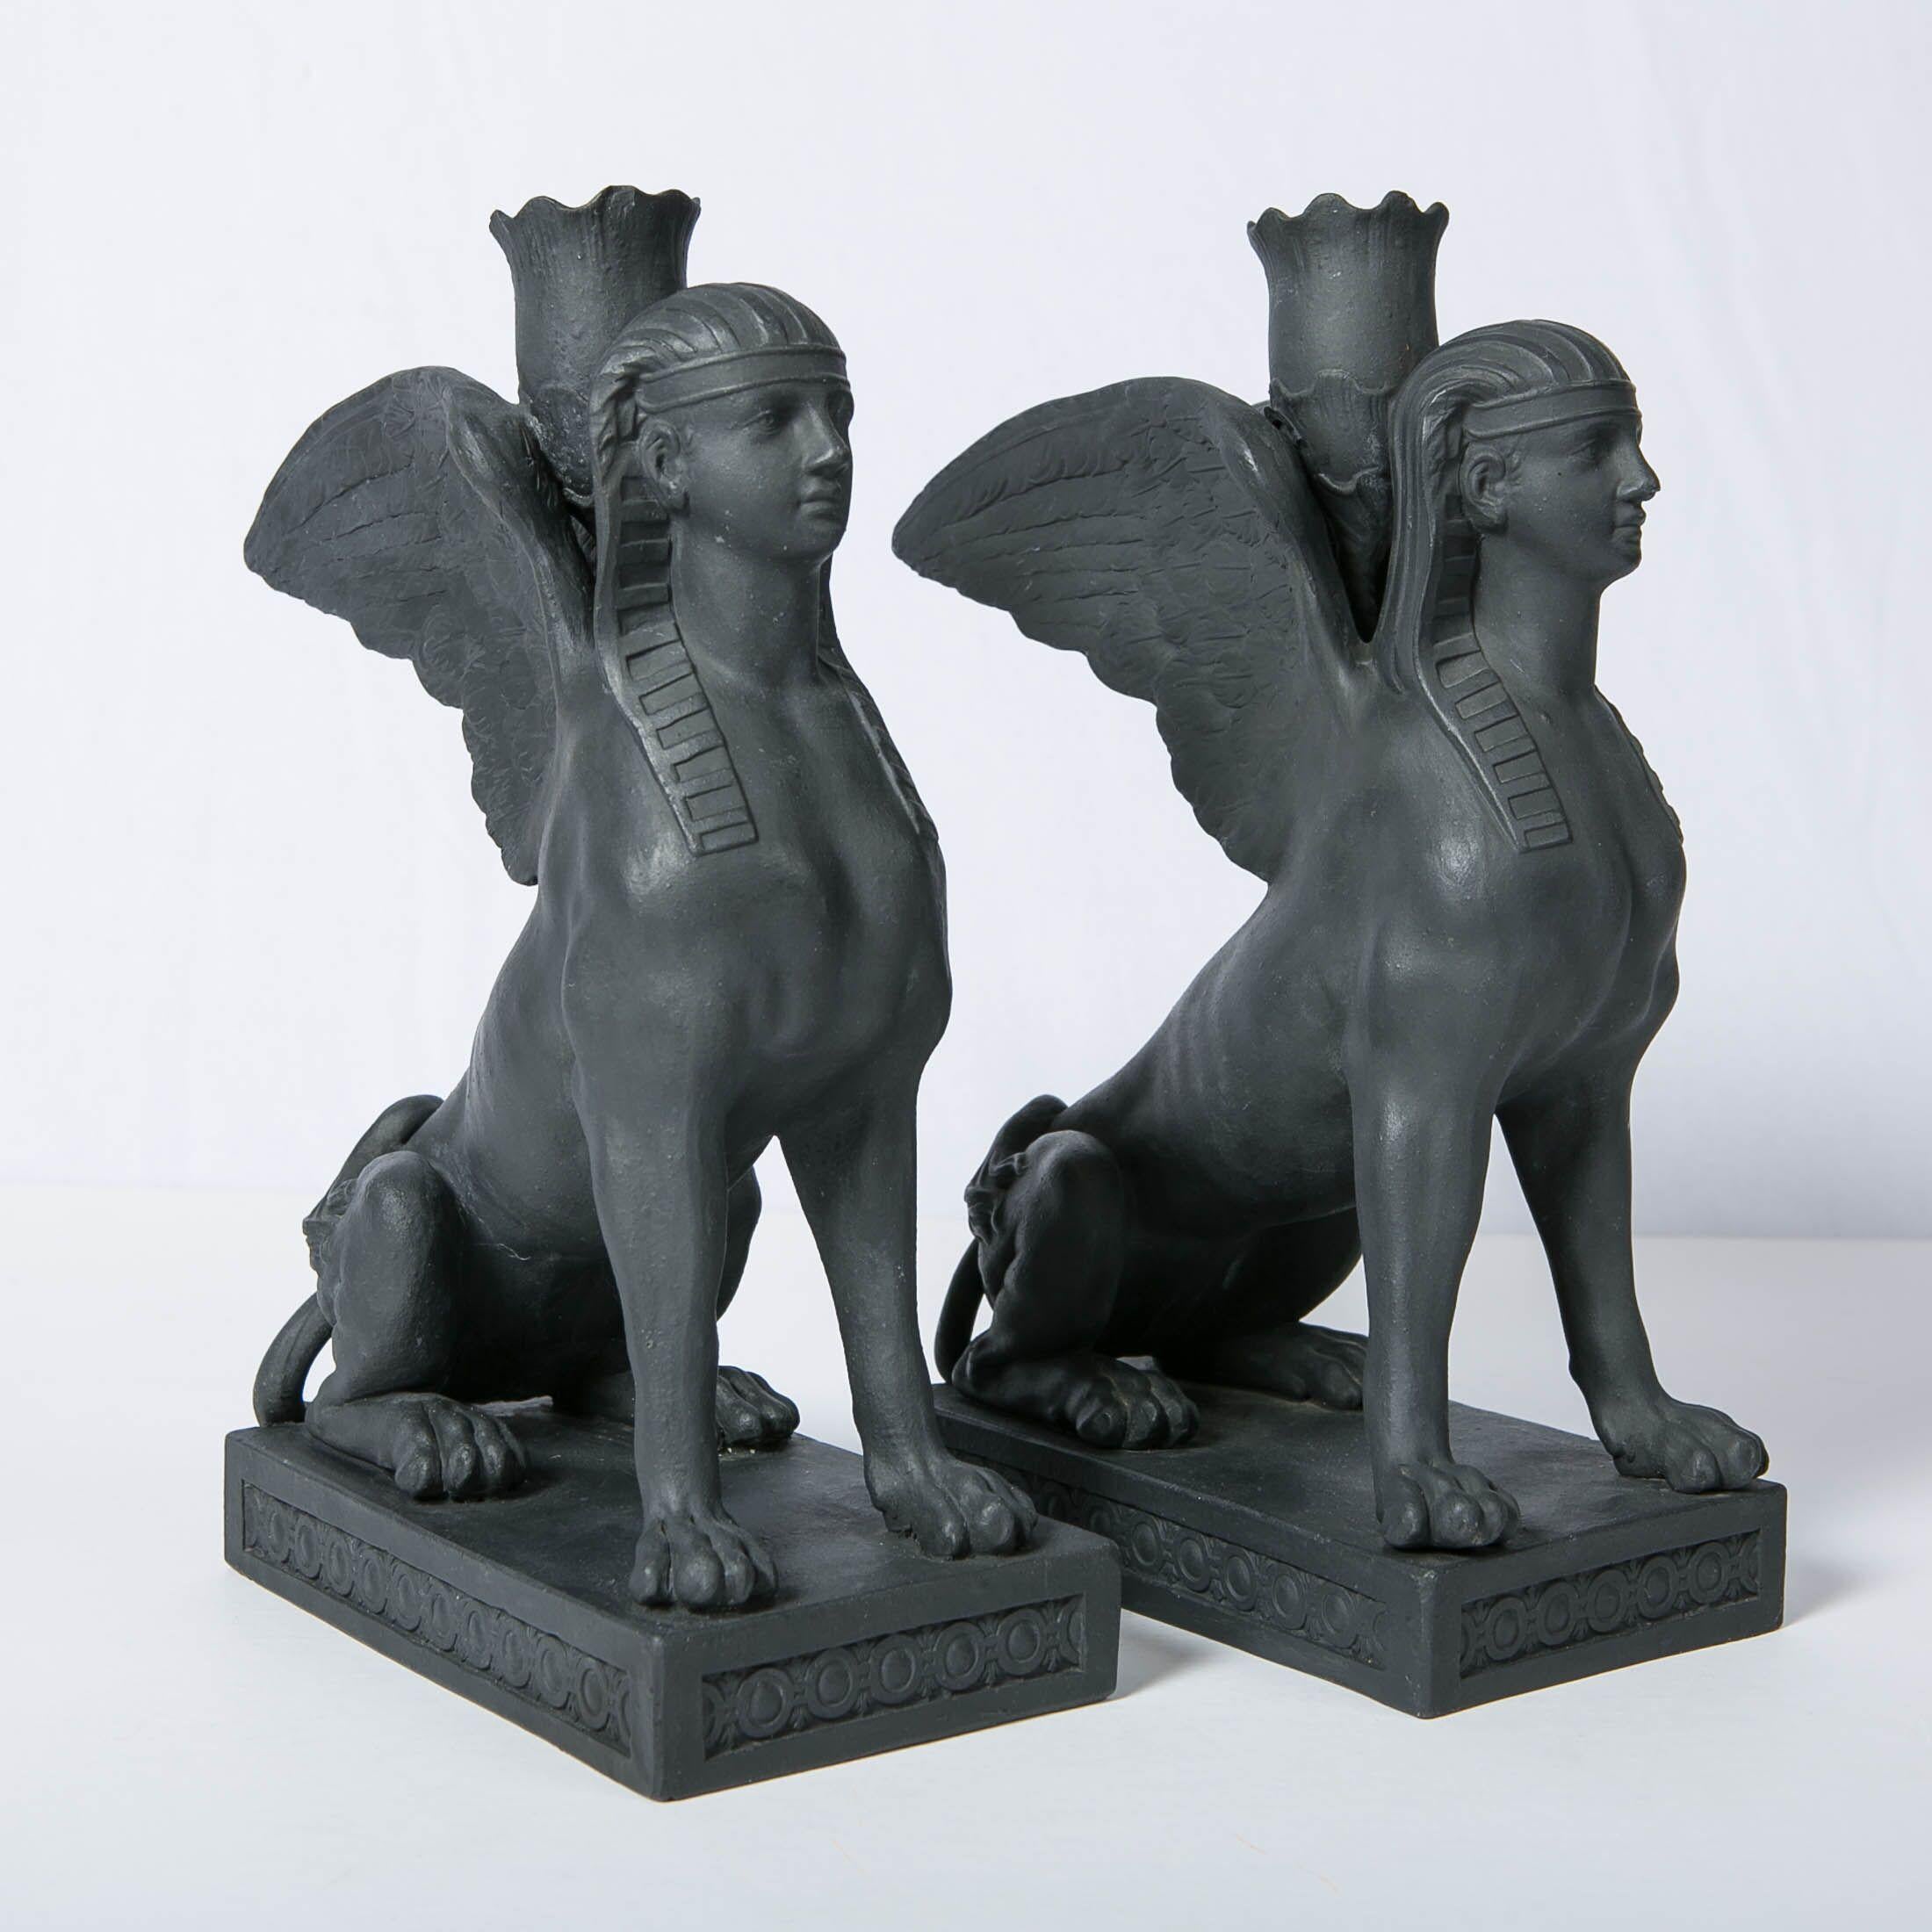 Molded Pair of Wedgwood Egyptian Revival Black Basalt Sphinxes Made 18th Century